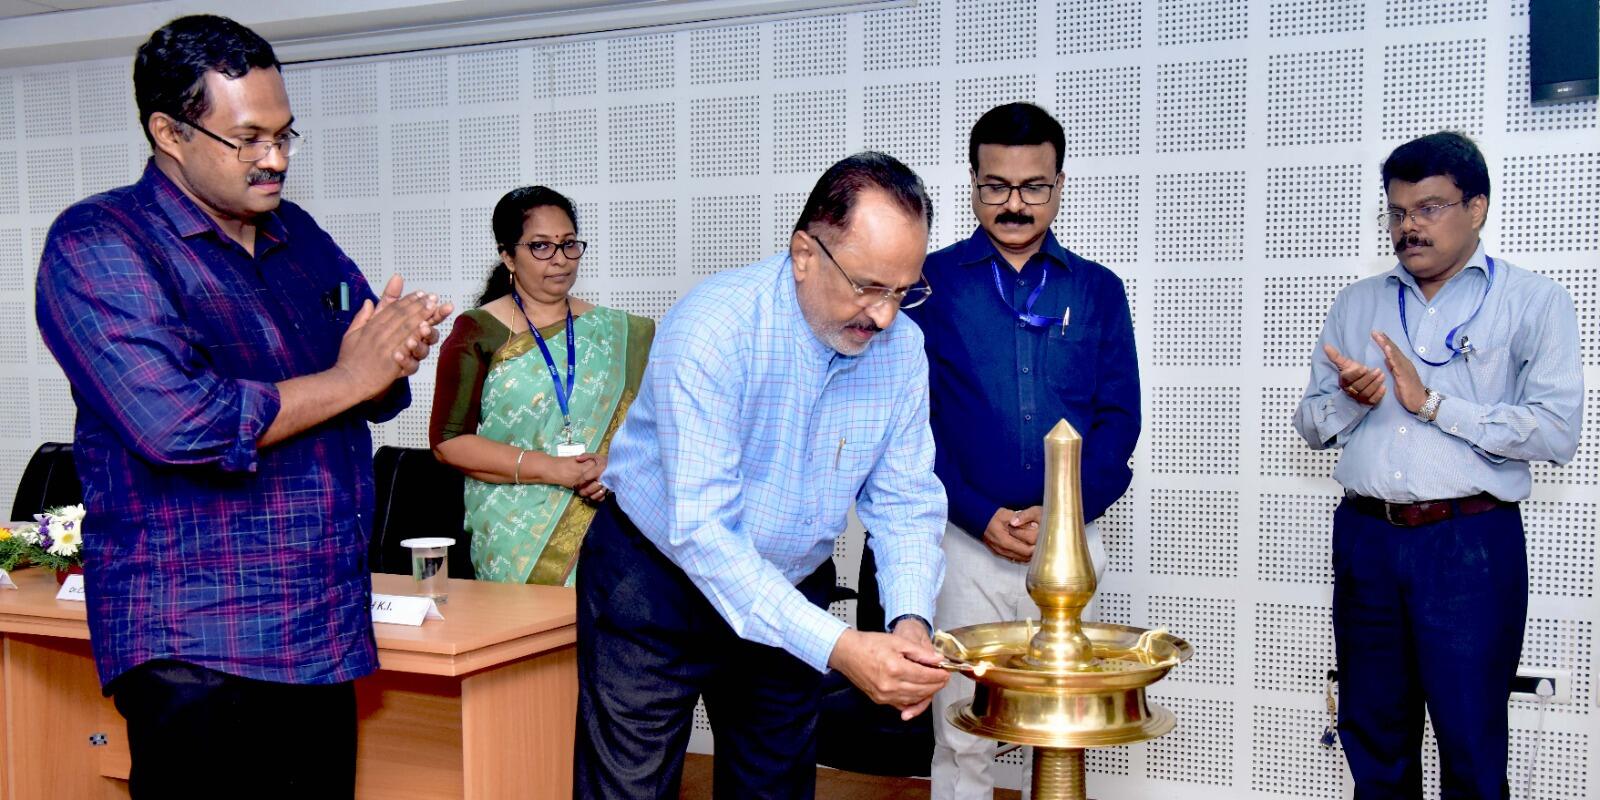 Scientists need to check misuse of traditional knowledge: CSIR-NIIST workshop on IPR